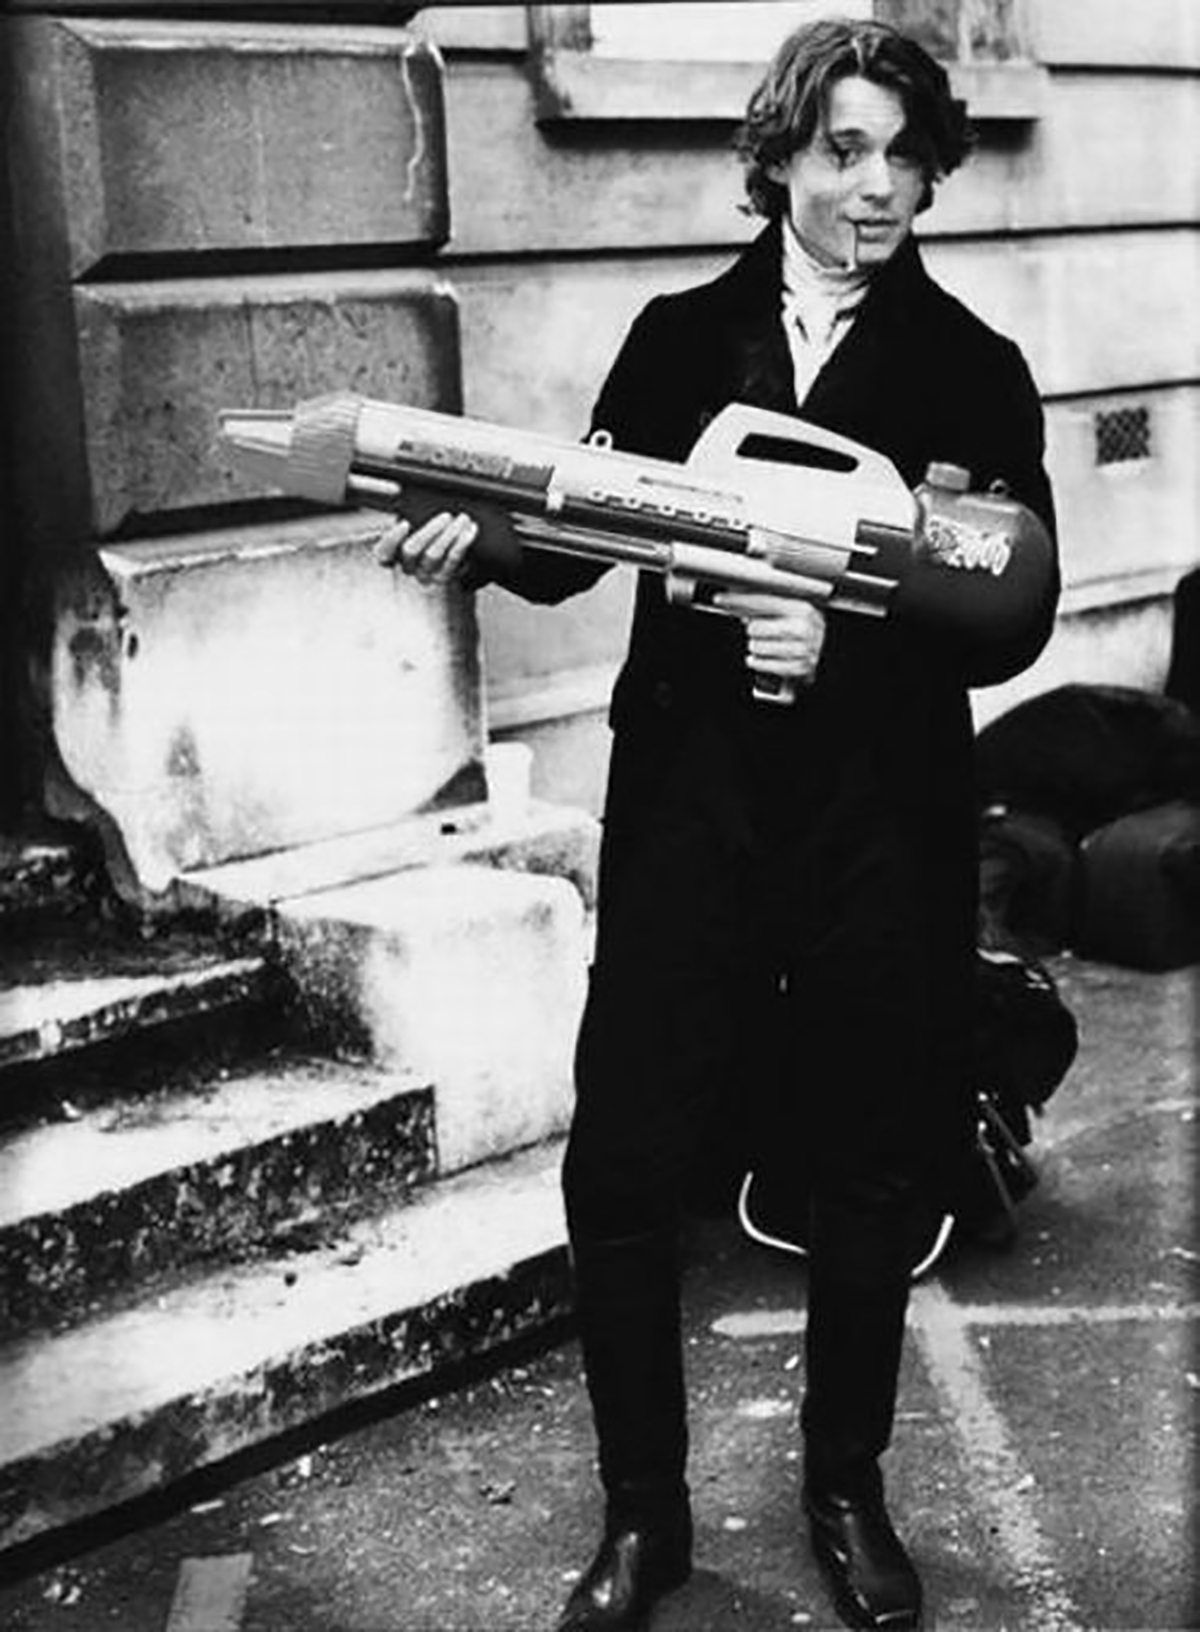 Johnny Depp with a super soaker on the set of Sleepy Hallow (1999).